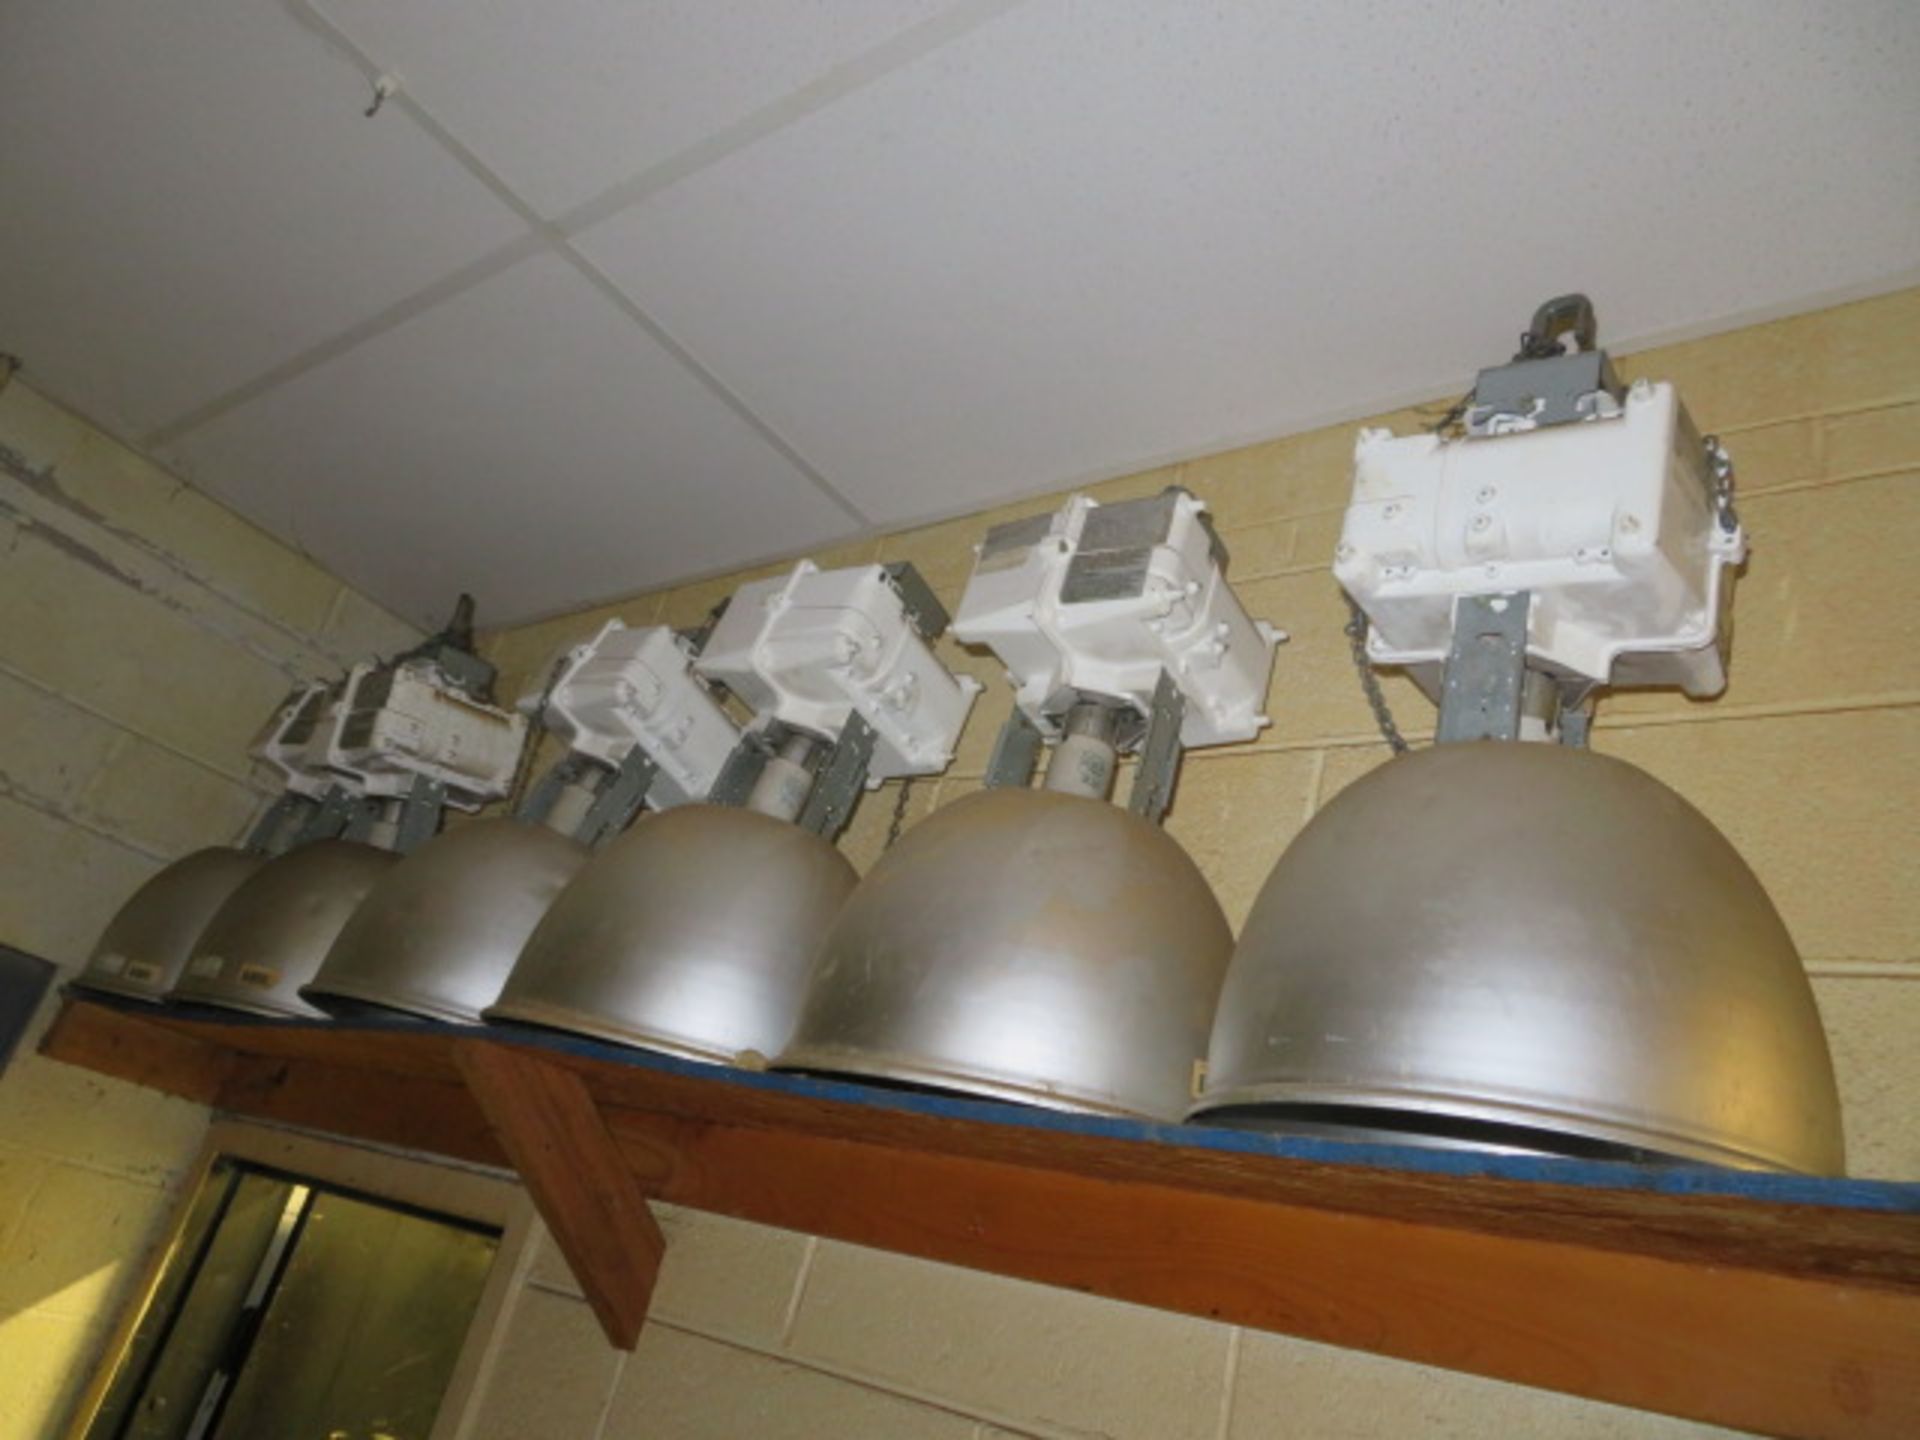 (15) 250 AMP LIGHTS, USES MERCURY LAMPS (7 TO BE REMOVED FROM CEILING) - Image 2 of 3